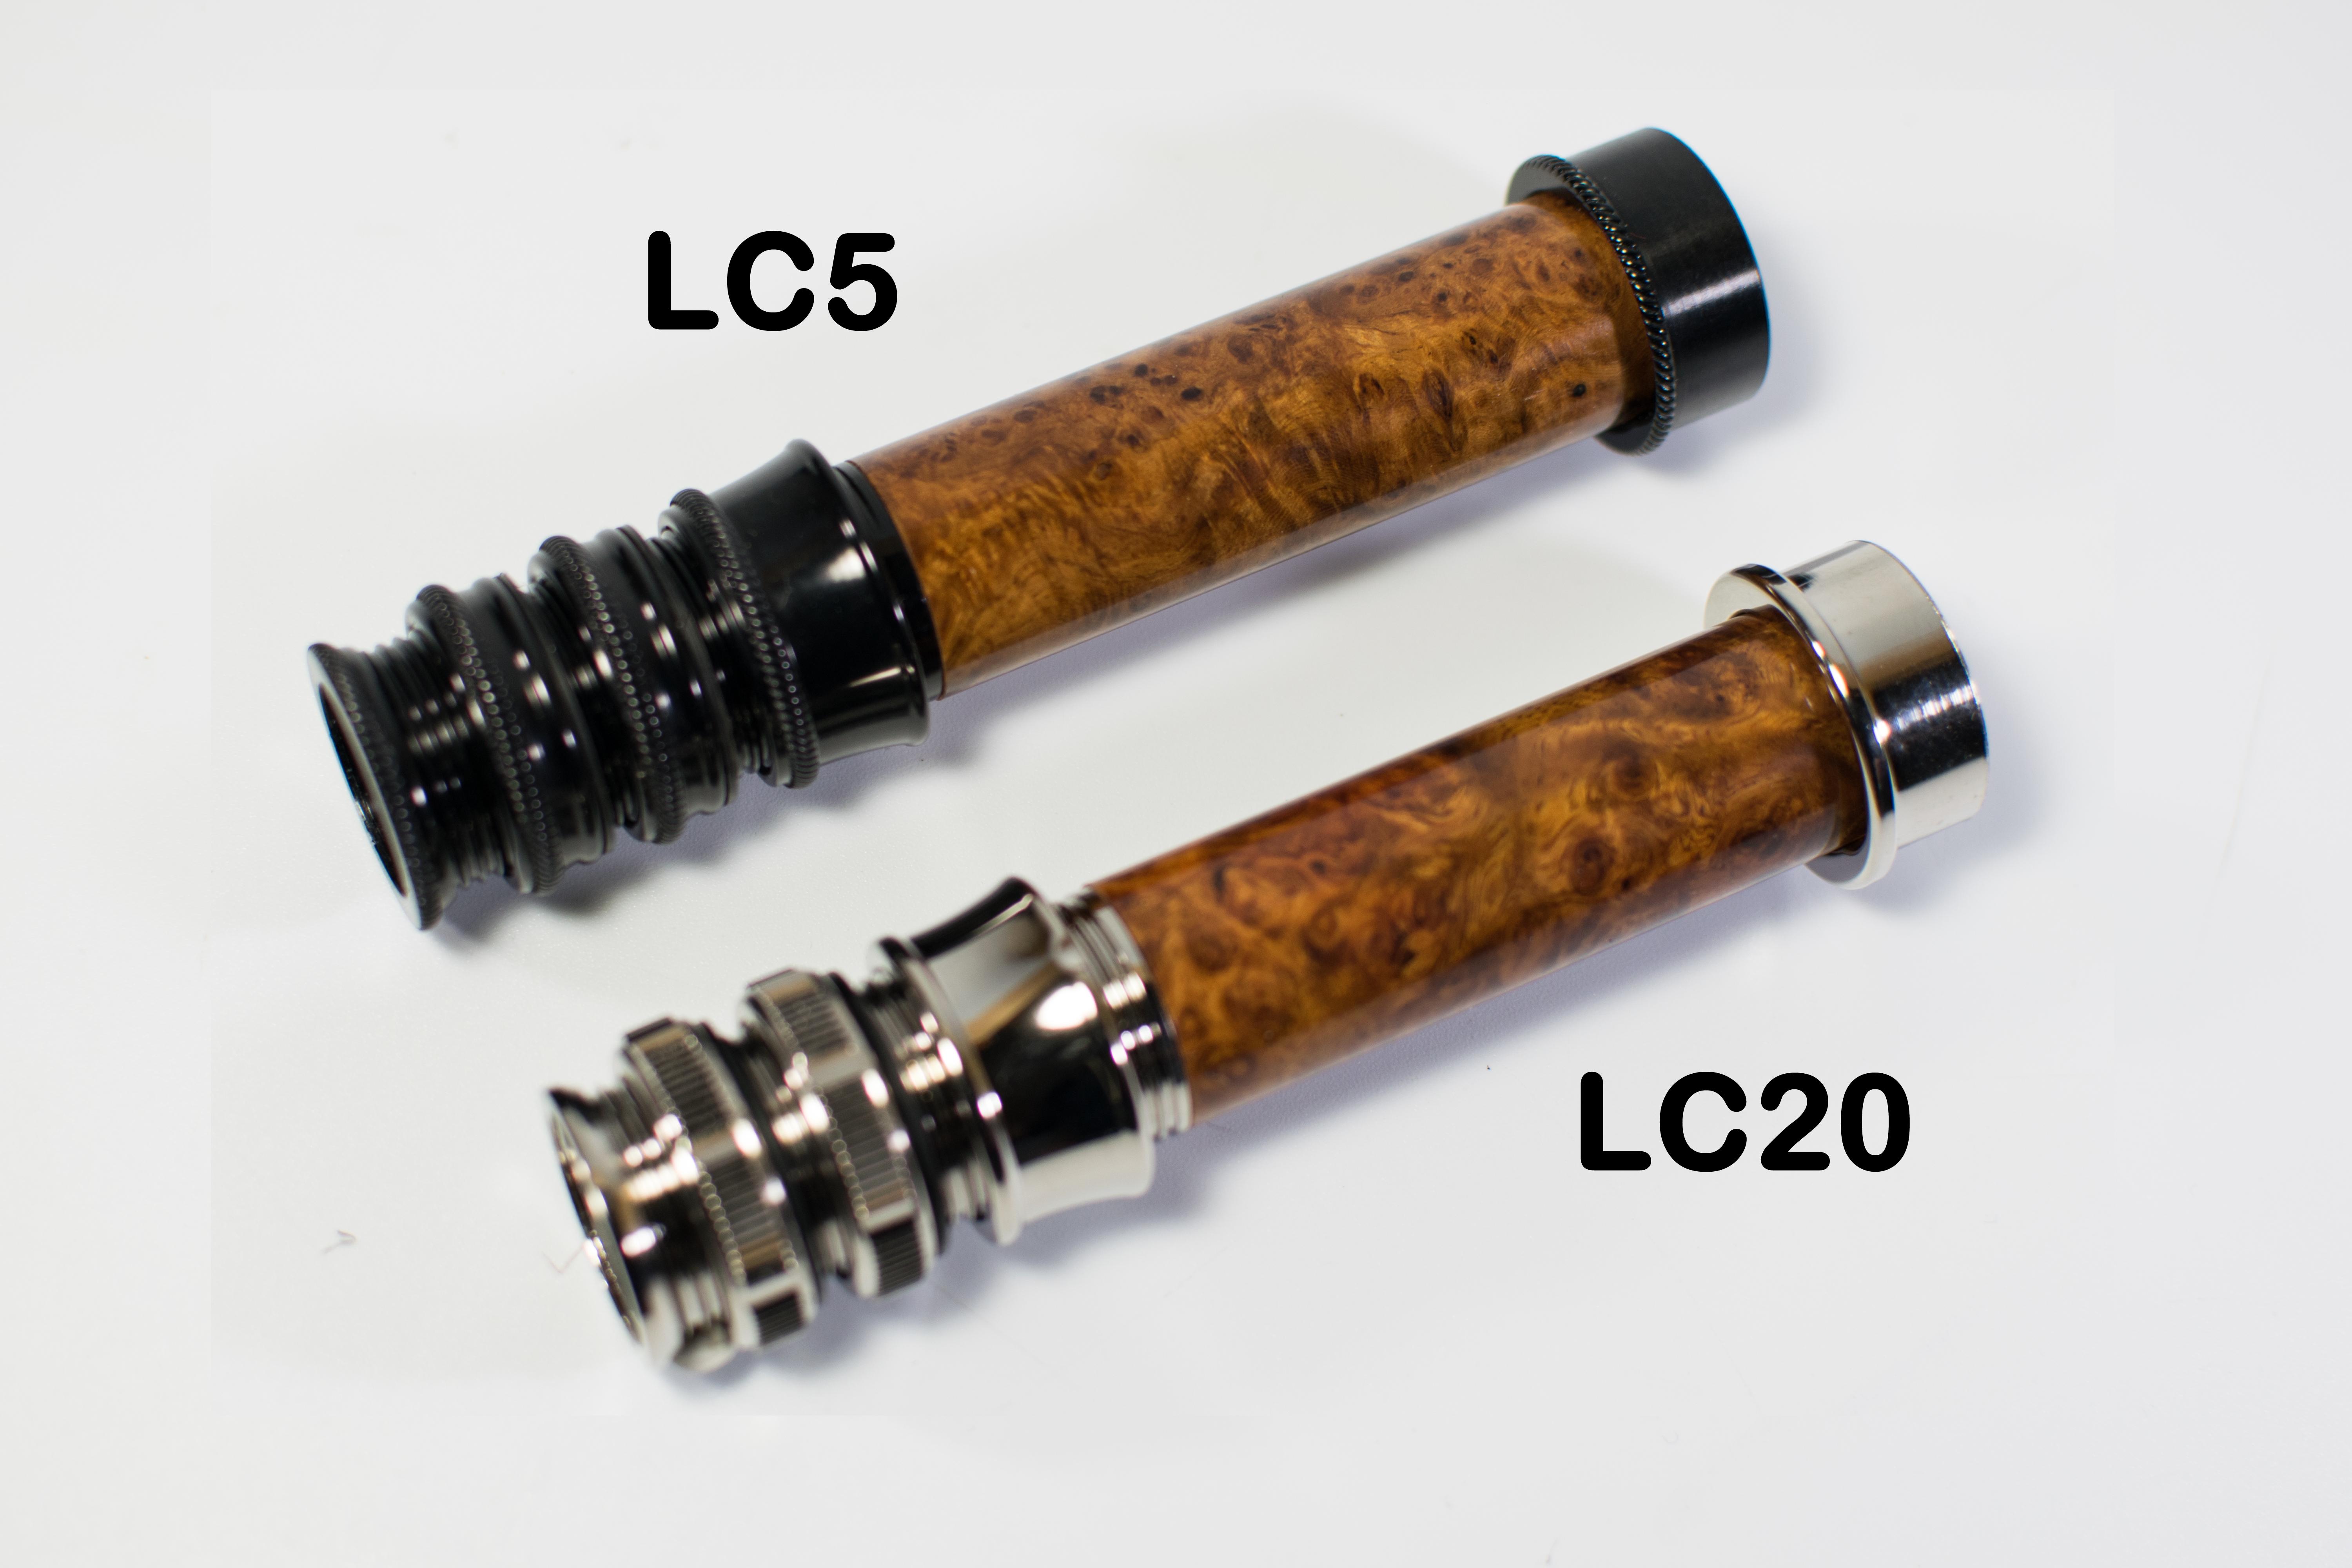 Lemke Concepts LC5 and LC20 reel seats